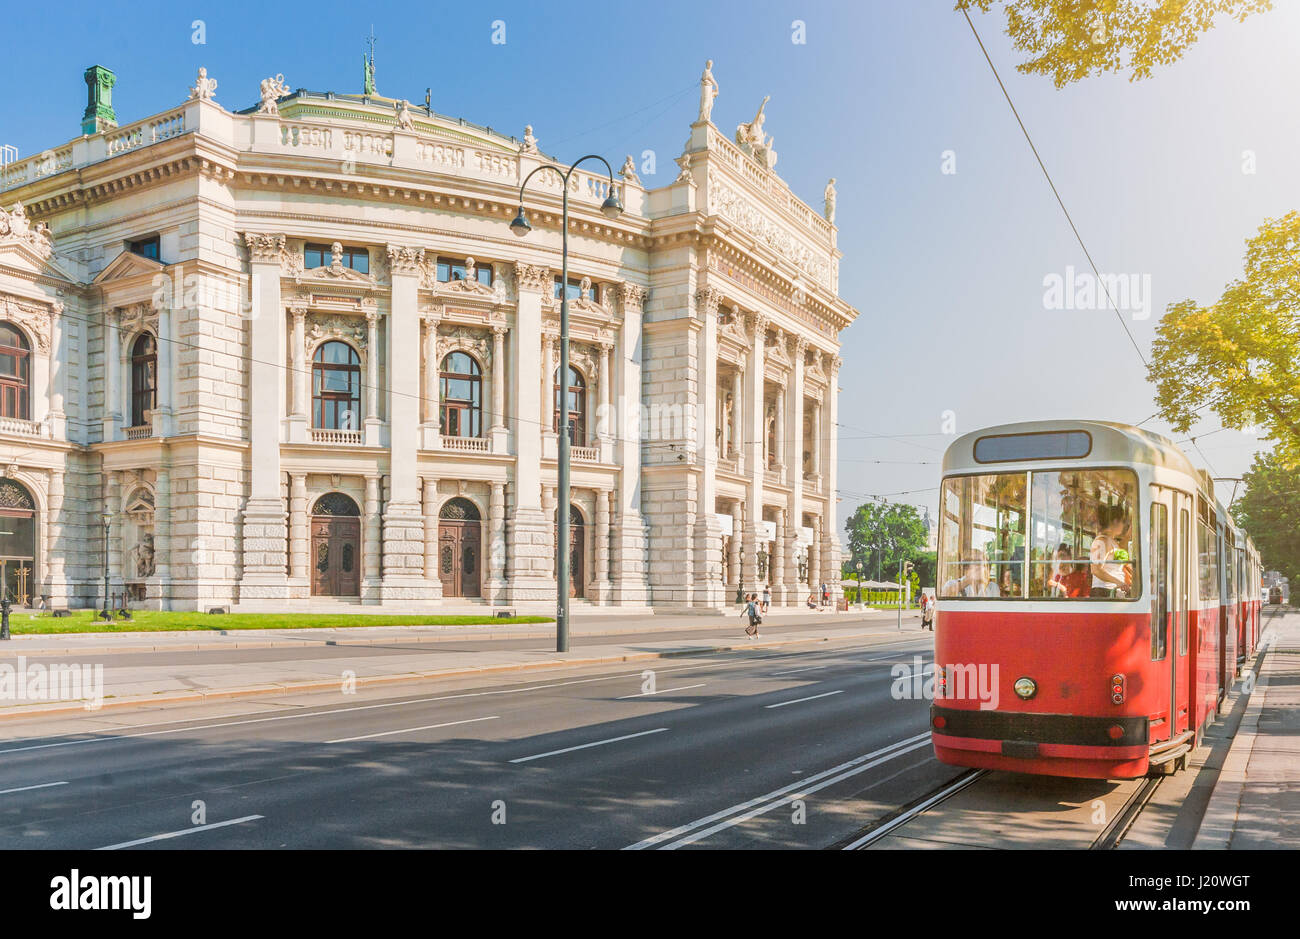 Classic view of famous Wiener Ringstrasse with historic Burgtheater and traditional red electric tram on a beautiful sunny day in Vienna, Austria Stock Photo